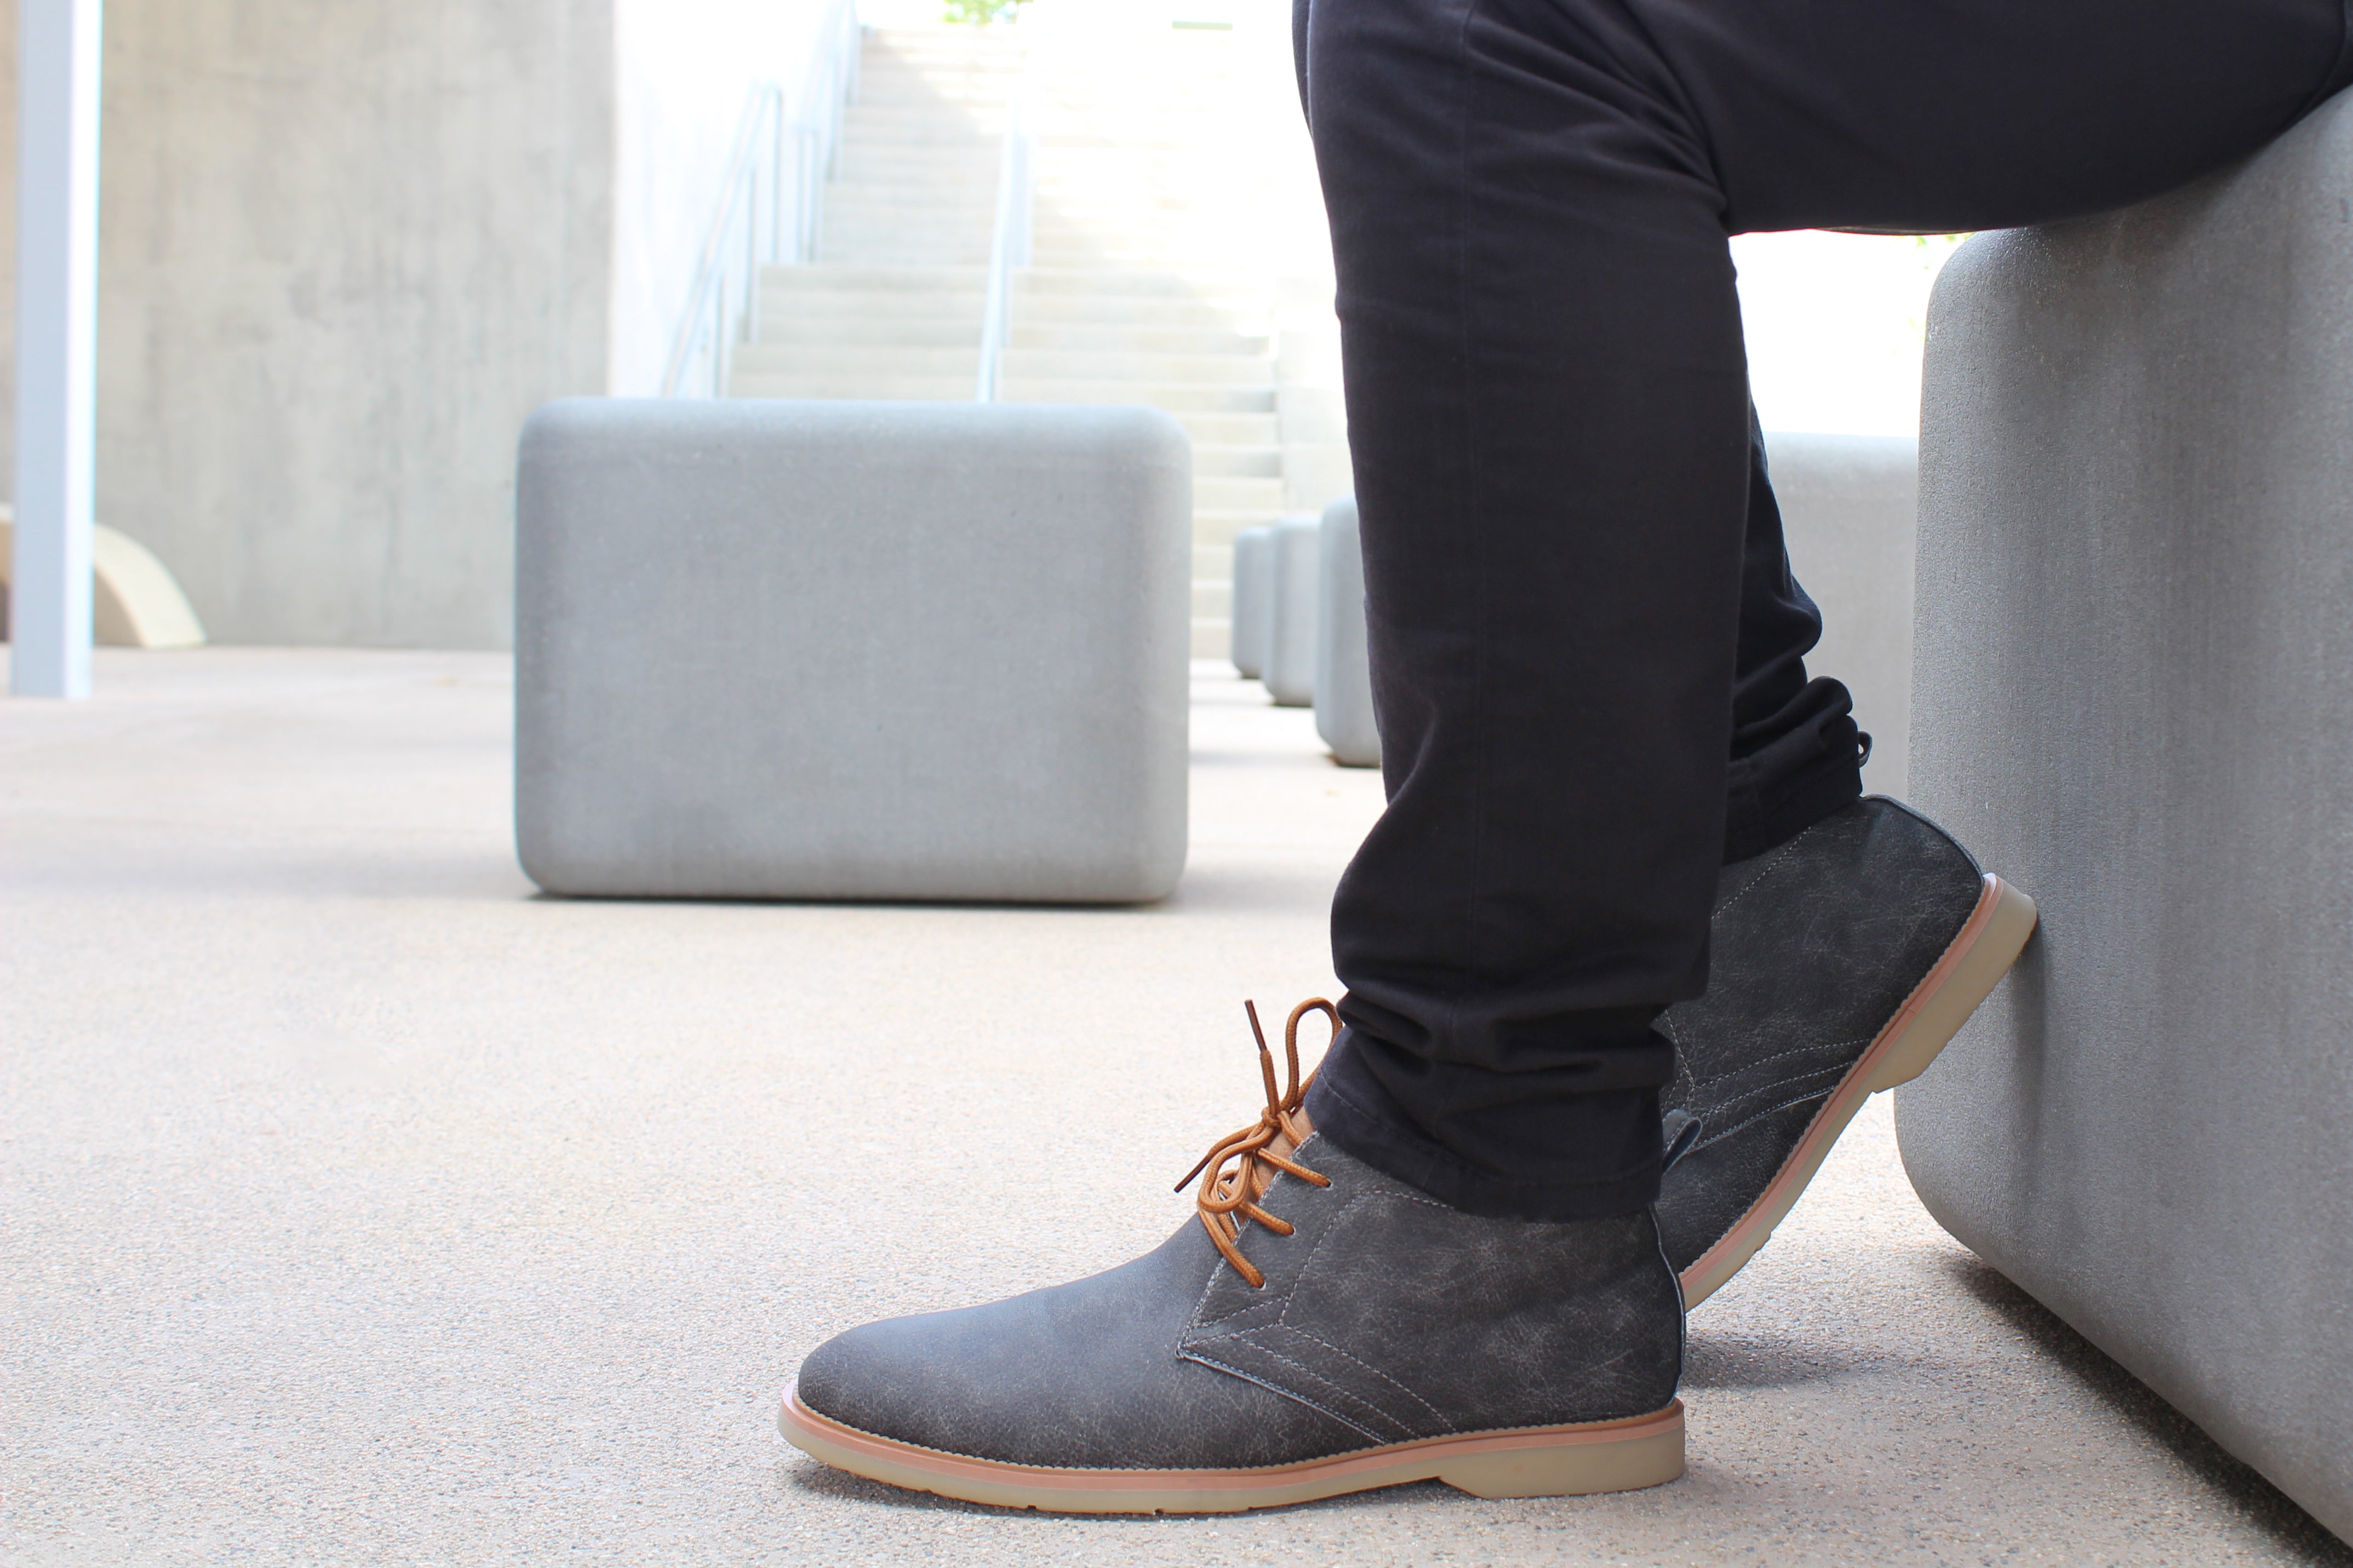 Two-Toned Chukka Boots | Marvin by Ferro Aldo | Conal Footwear | Action Shot 1